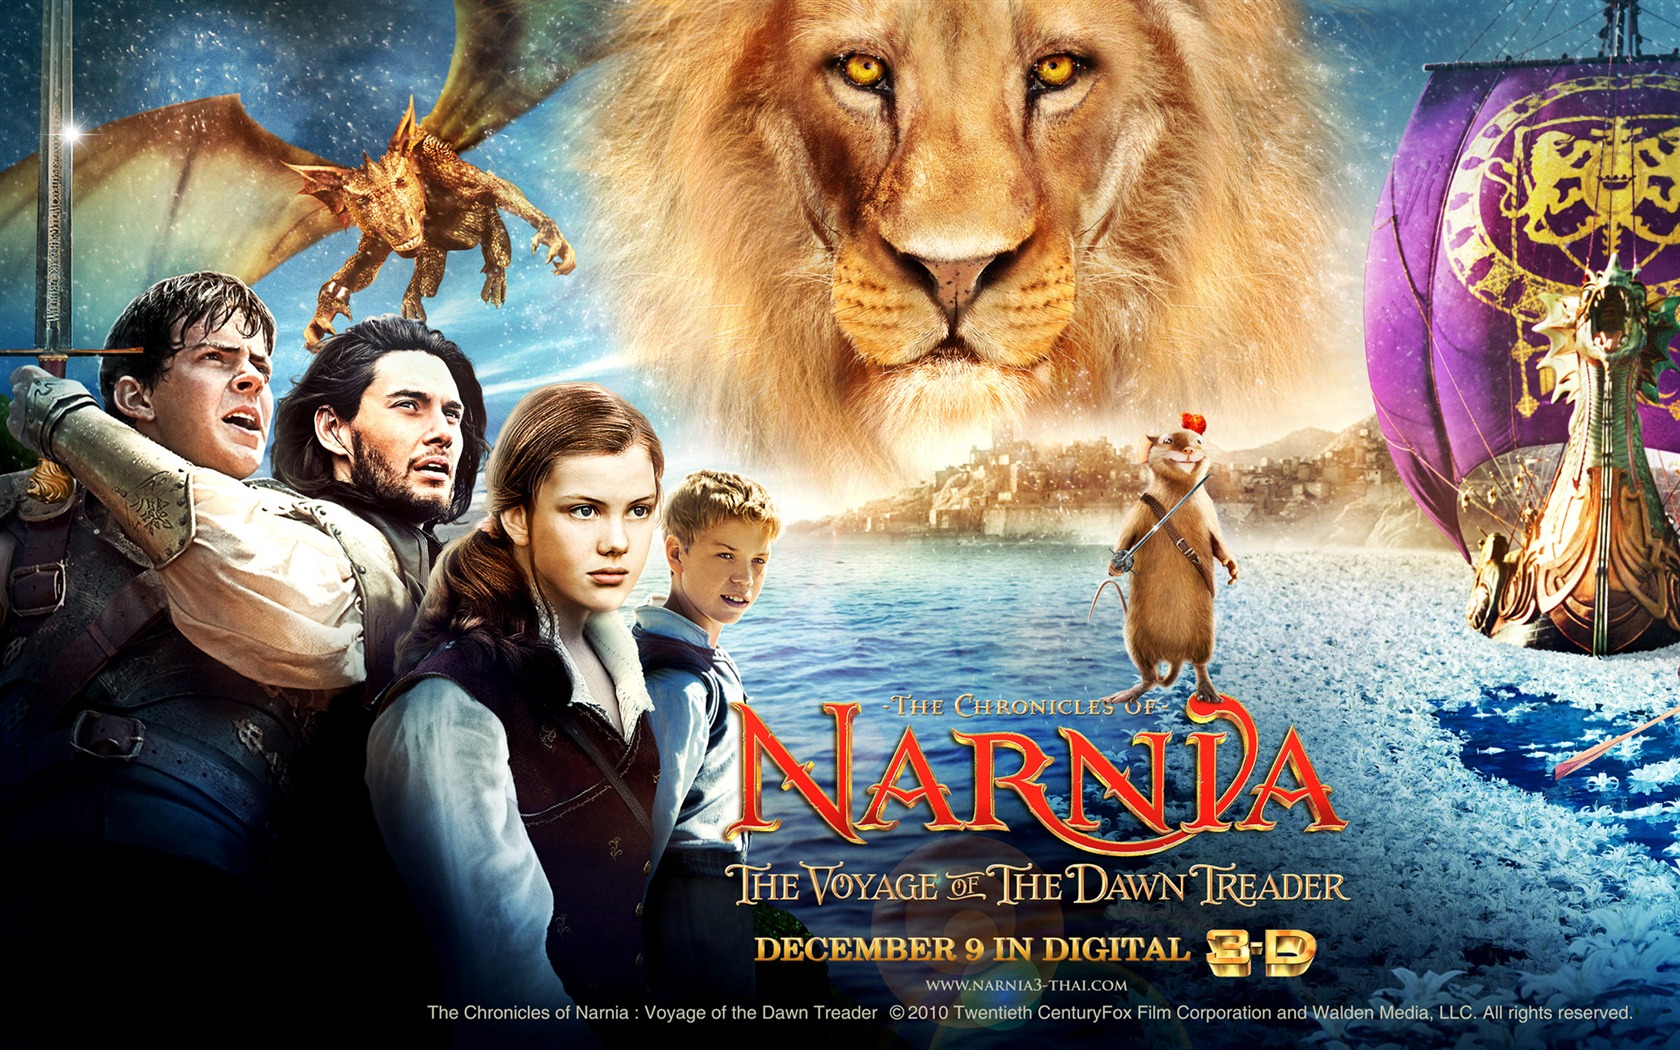 The Chronicles of Narnia: The Voyage of the Dawn Treader wallpapers #14 - 1680x1050